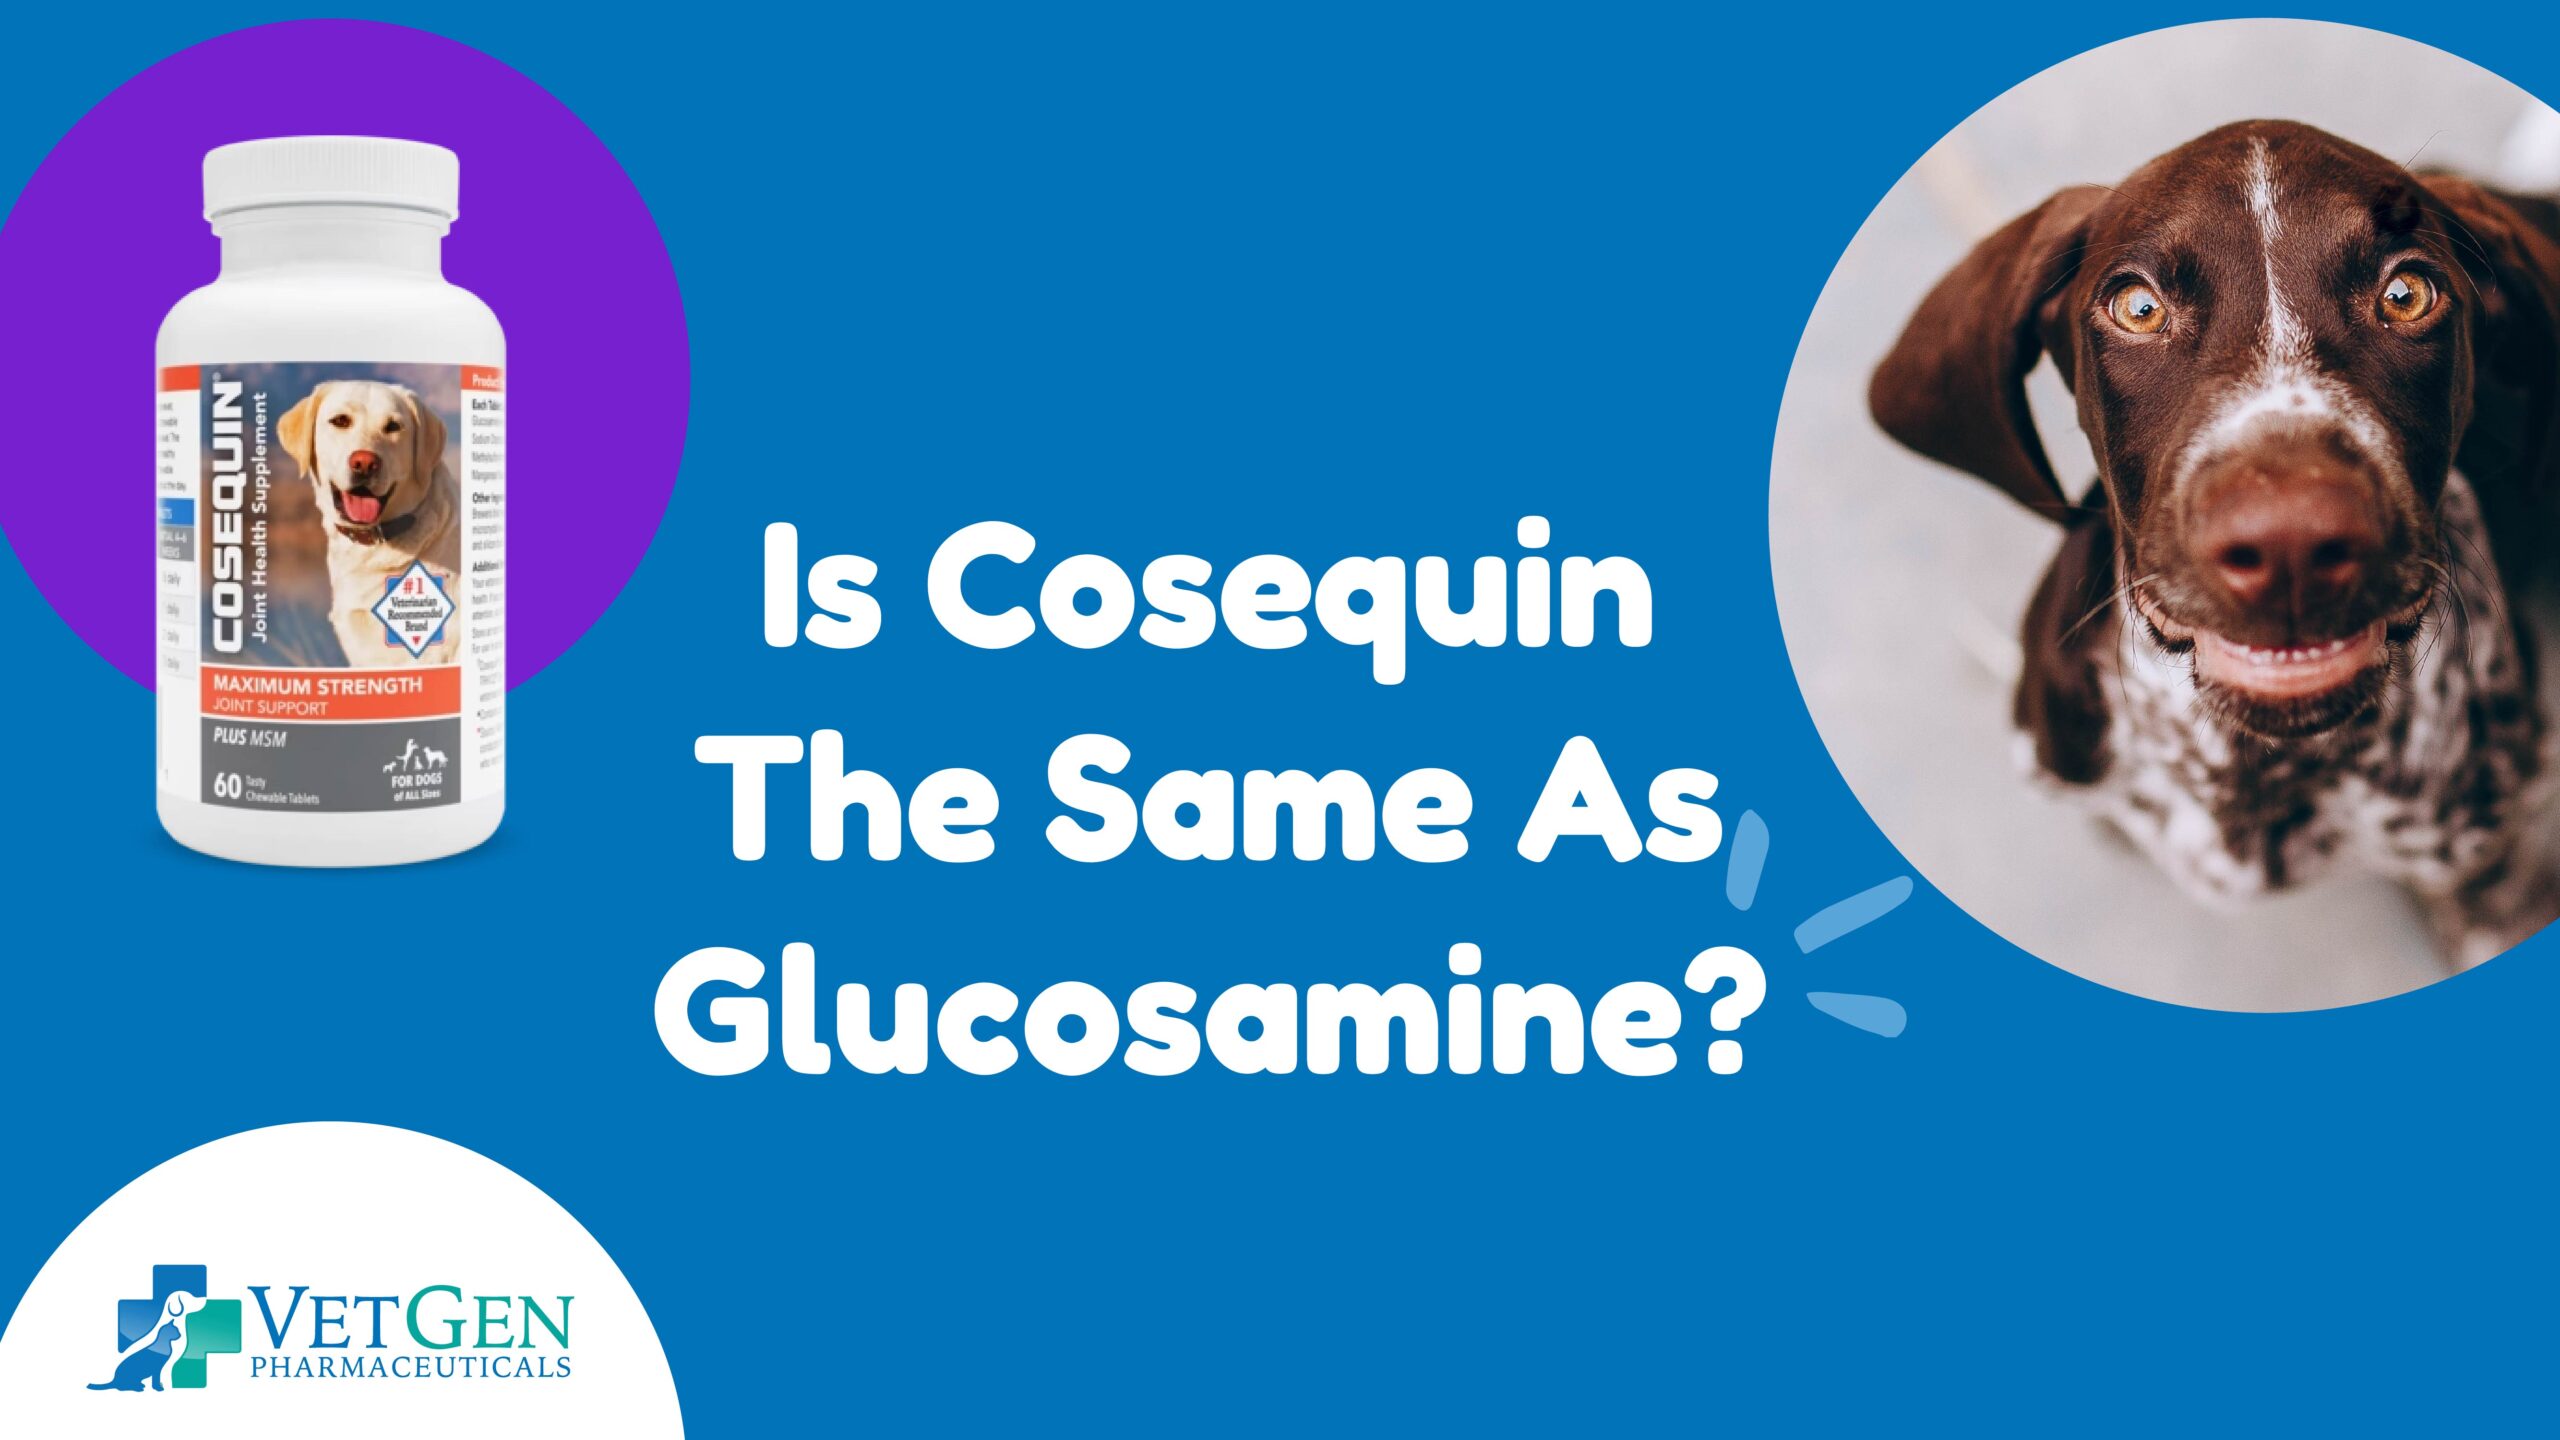 Is Cosequin The Same As Glucosamine?